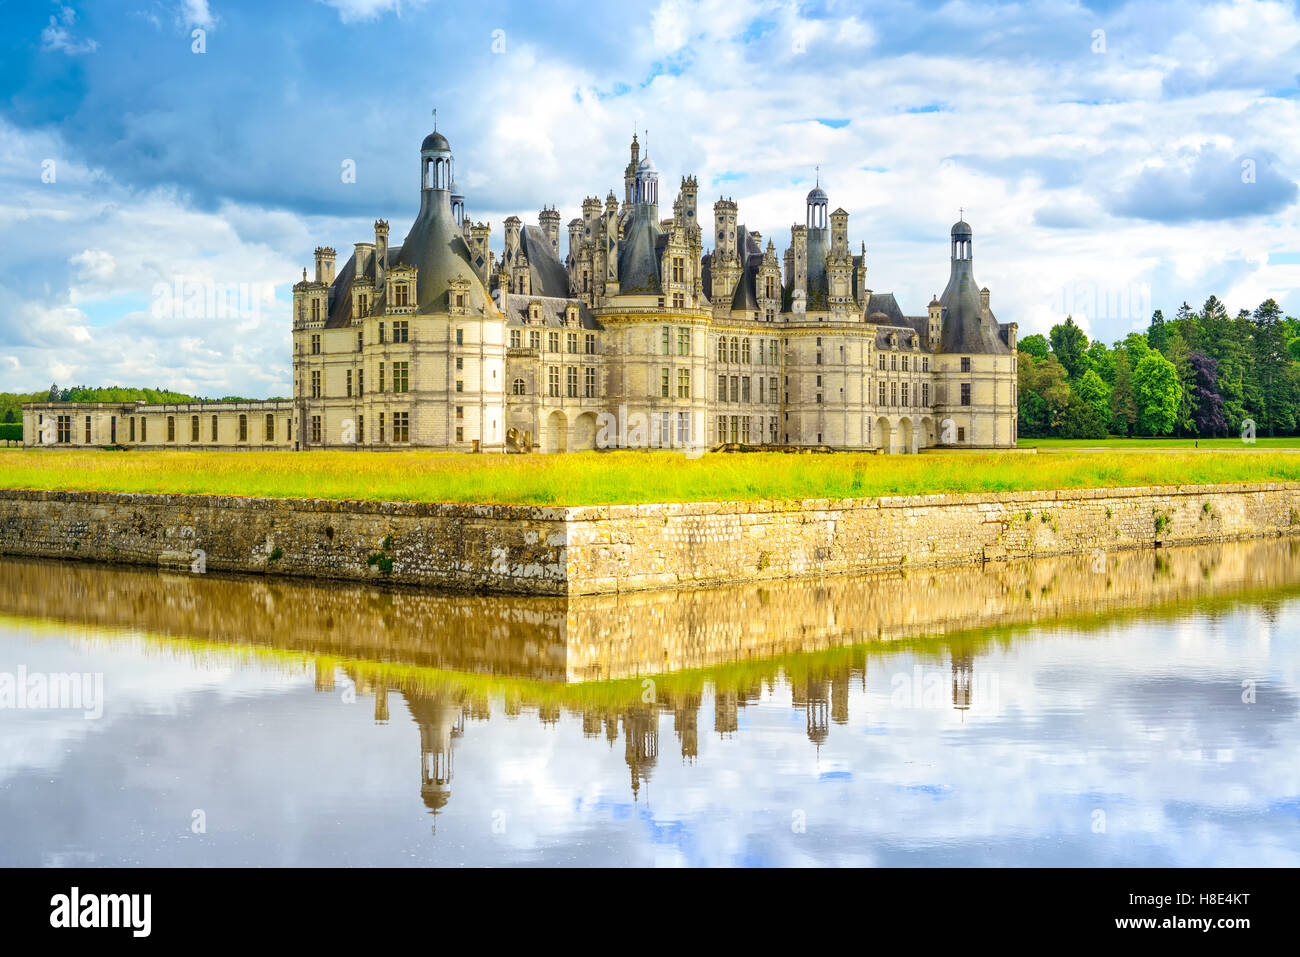 Chateau de Chambord, royal medieval french castle and reflection. Loire Valley, France, Europe. Unesco heritage site Stock Photo